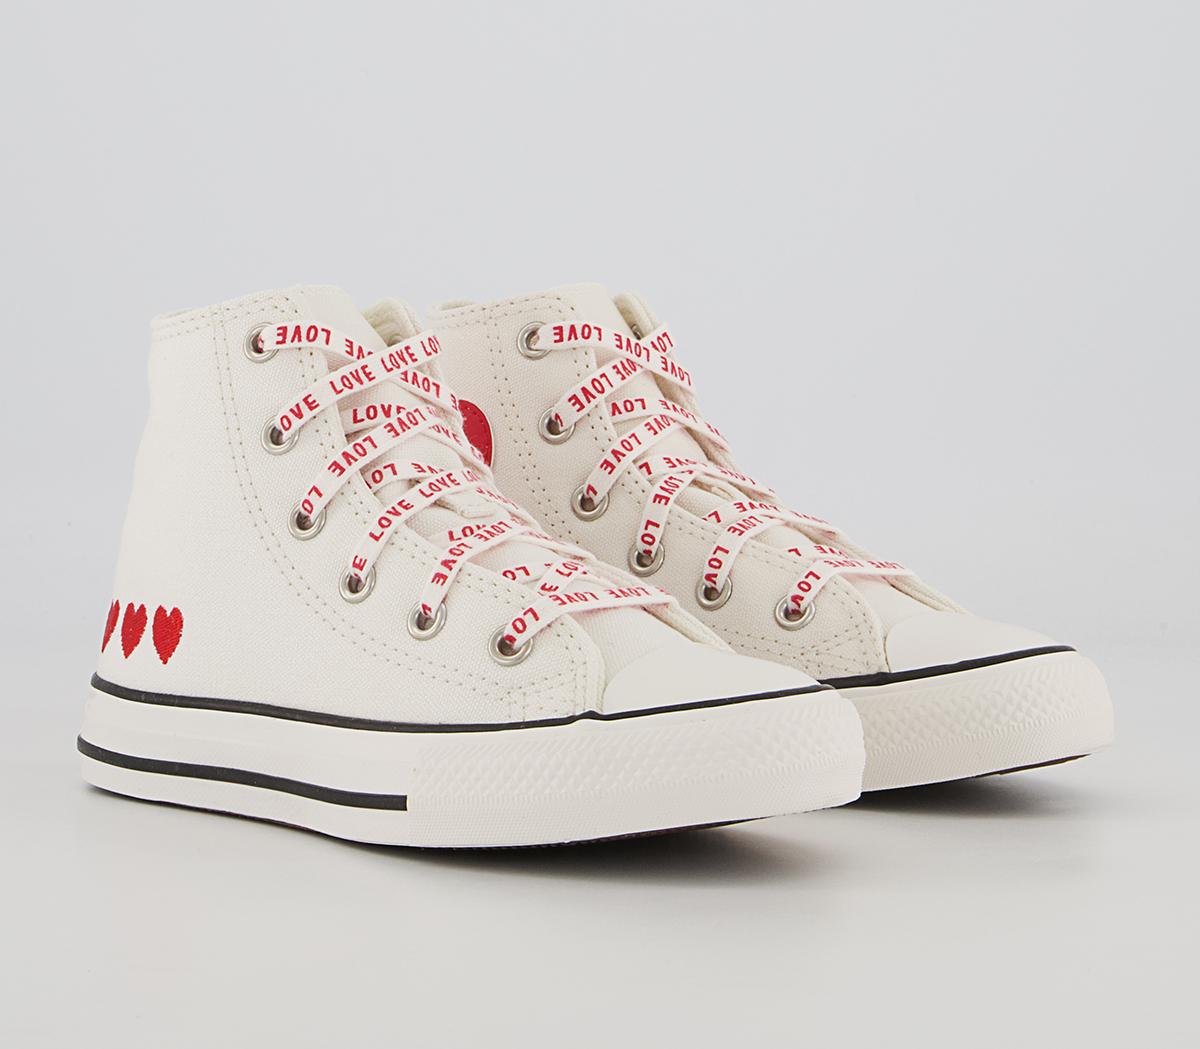 Converse All Star Hi Youth Trainers Vintage White University Red Black ...